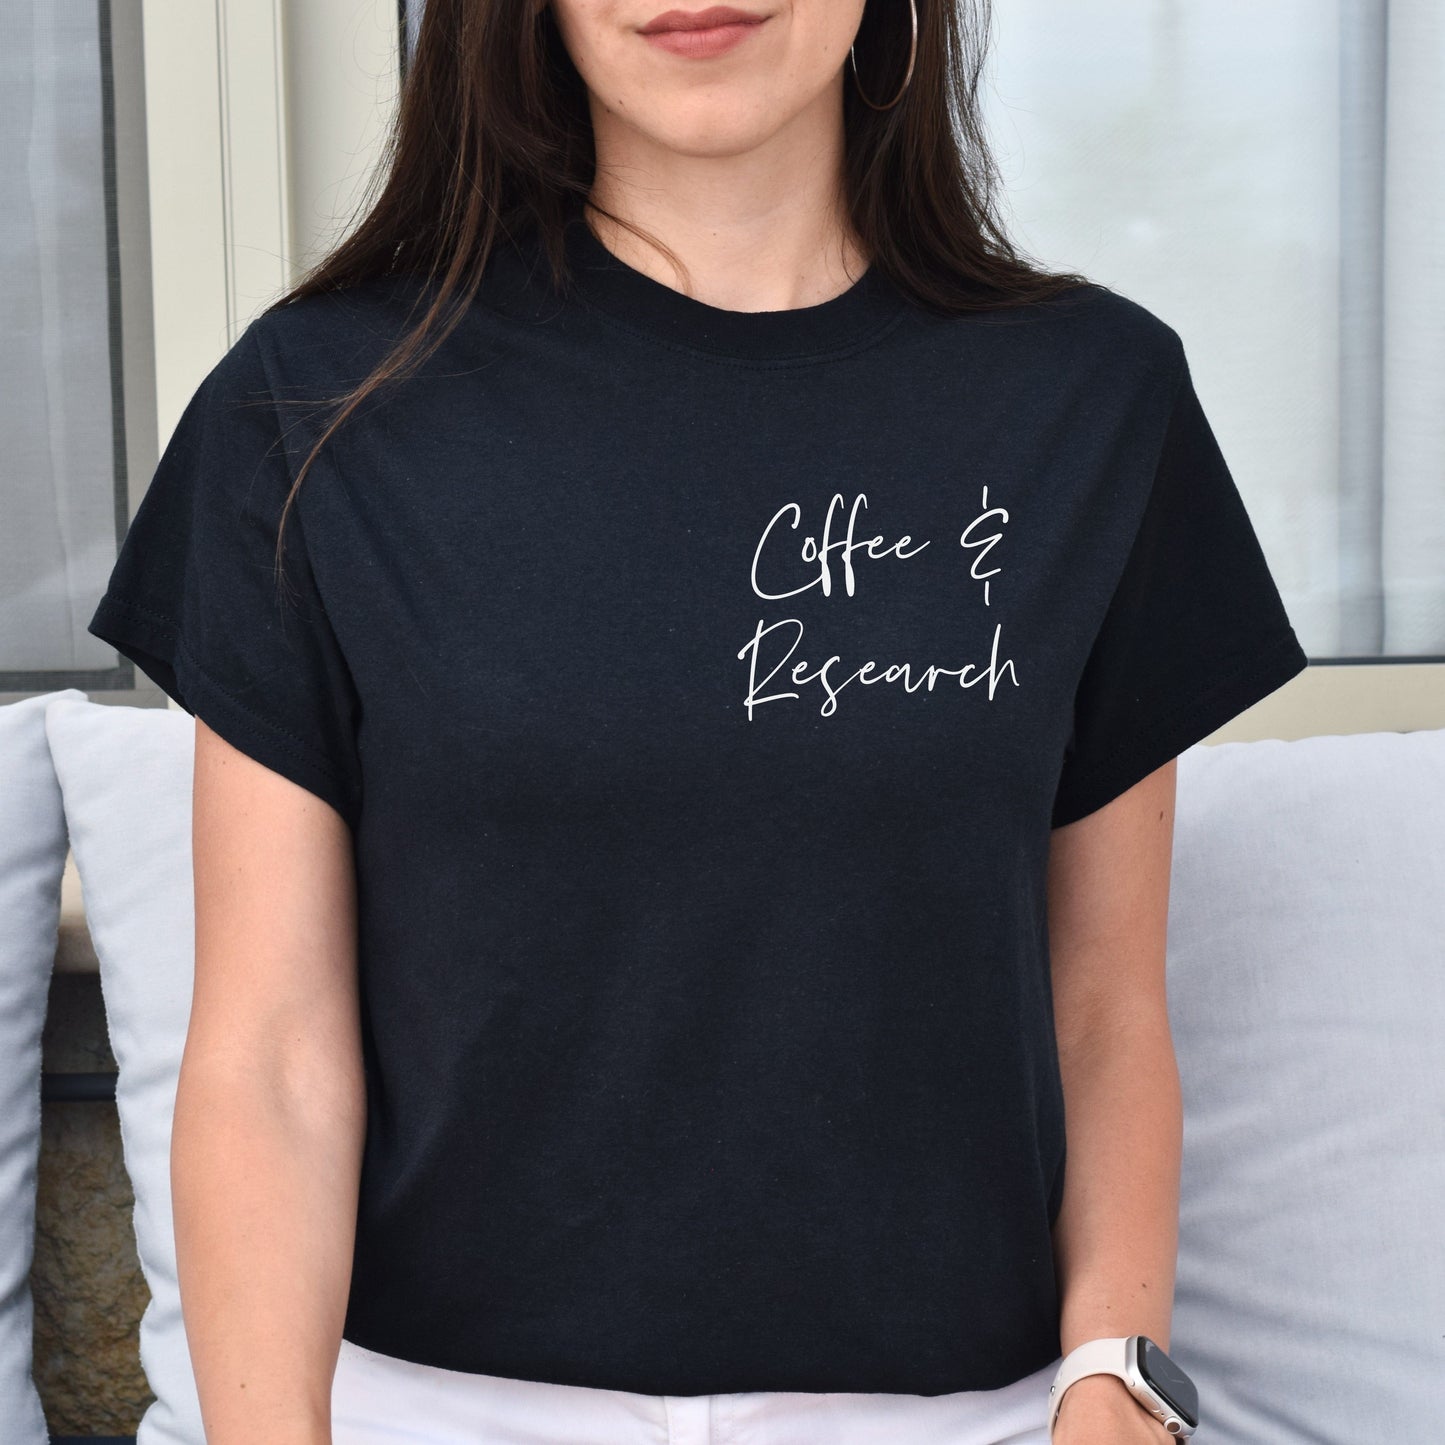 Coffee and research pocket Unisex T-shirt Medical research tee Black Navy Dark Heather-Black-Family-Gift-Planet